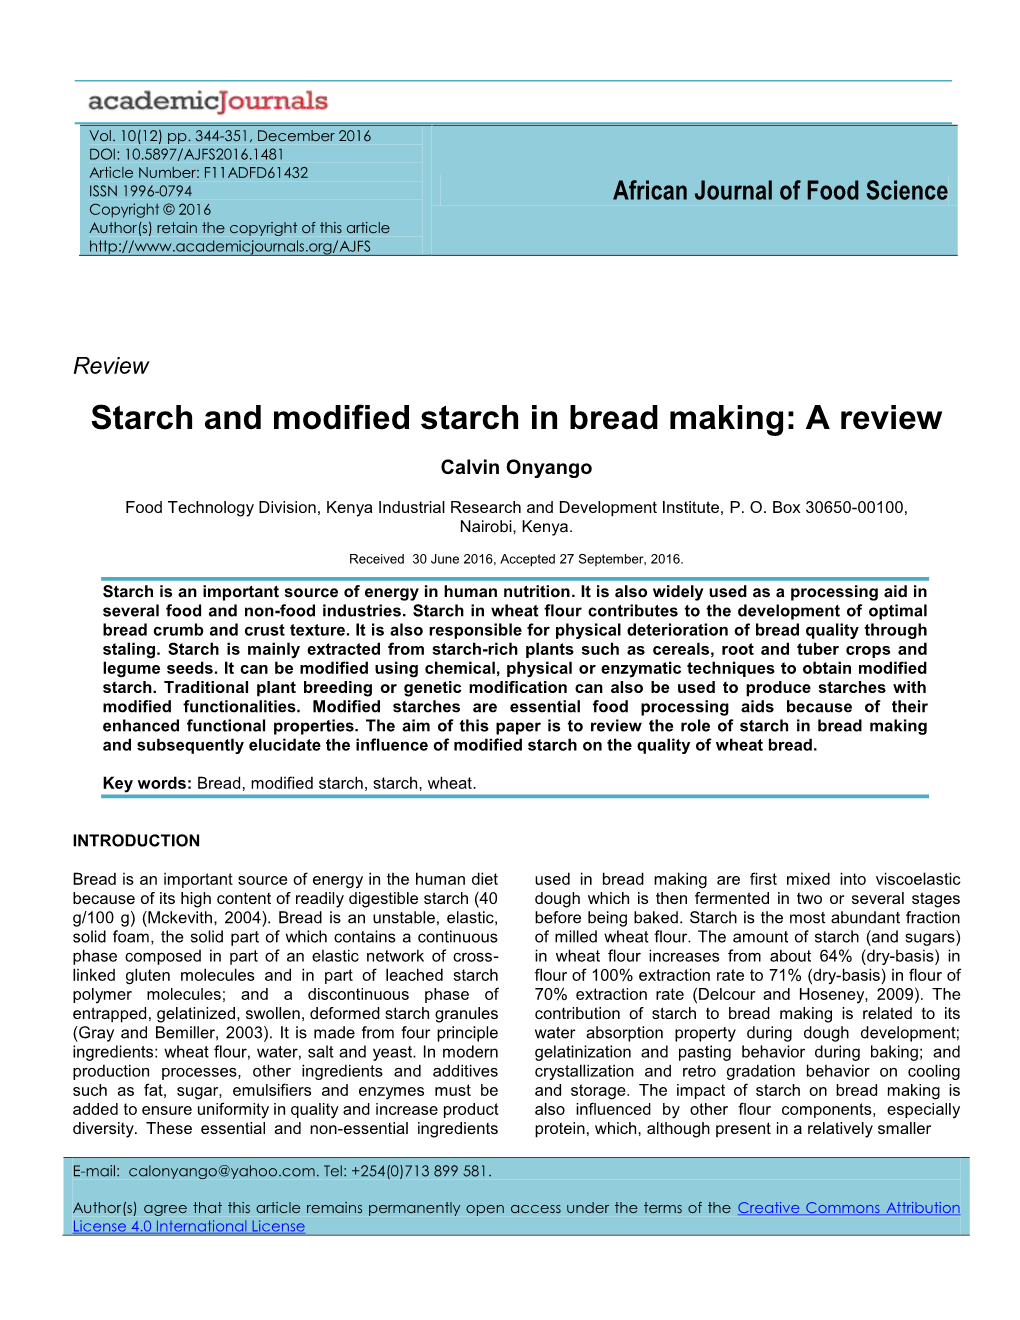 Starch and Modified Starch in Bread Making: a Review